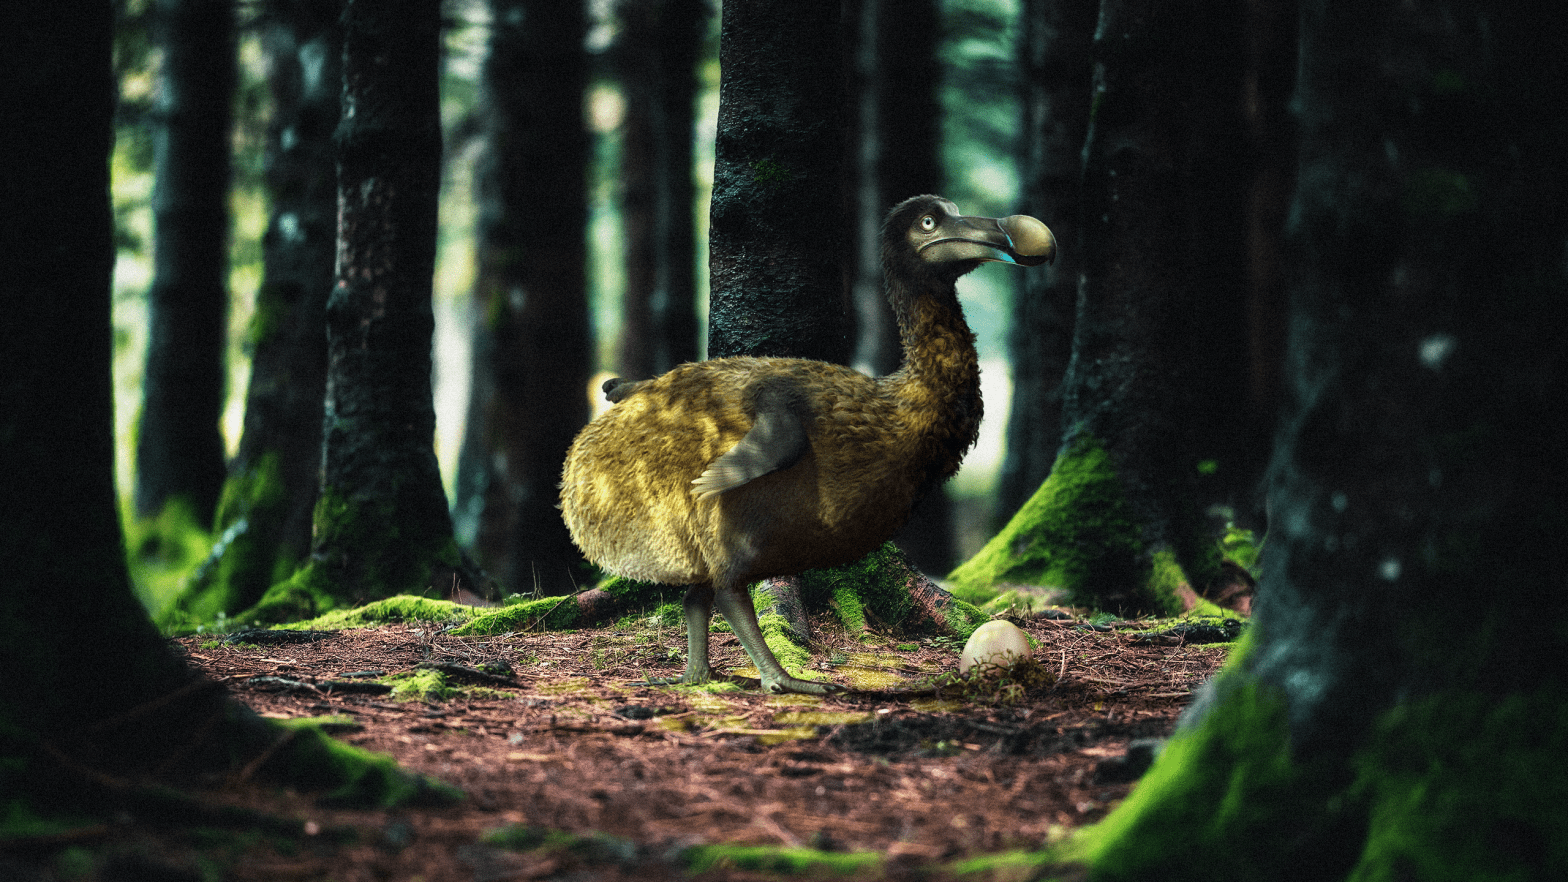 An artist's imagining of the dodo bird, which went extinct in the 17th century. (Illustration: Colossal Biosciences)